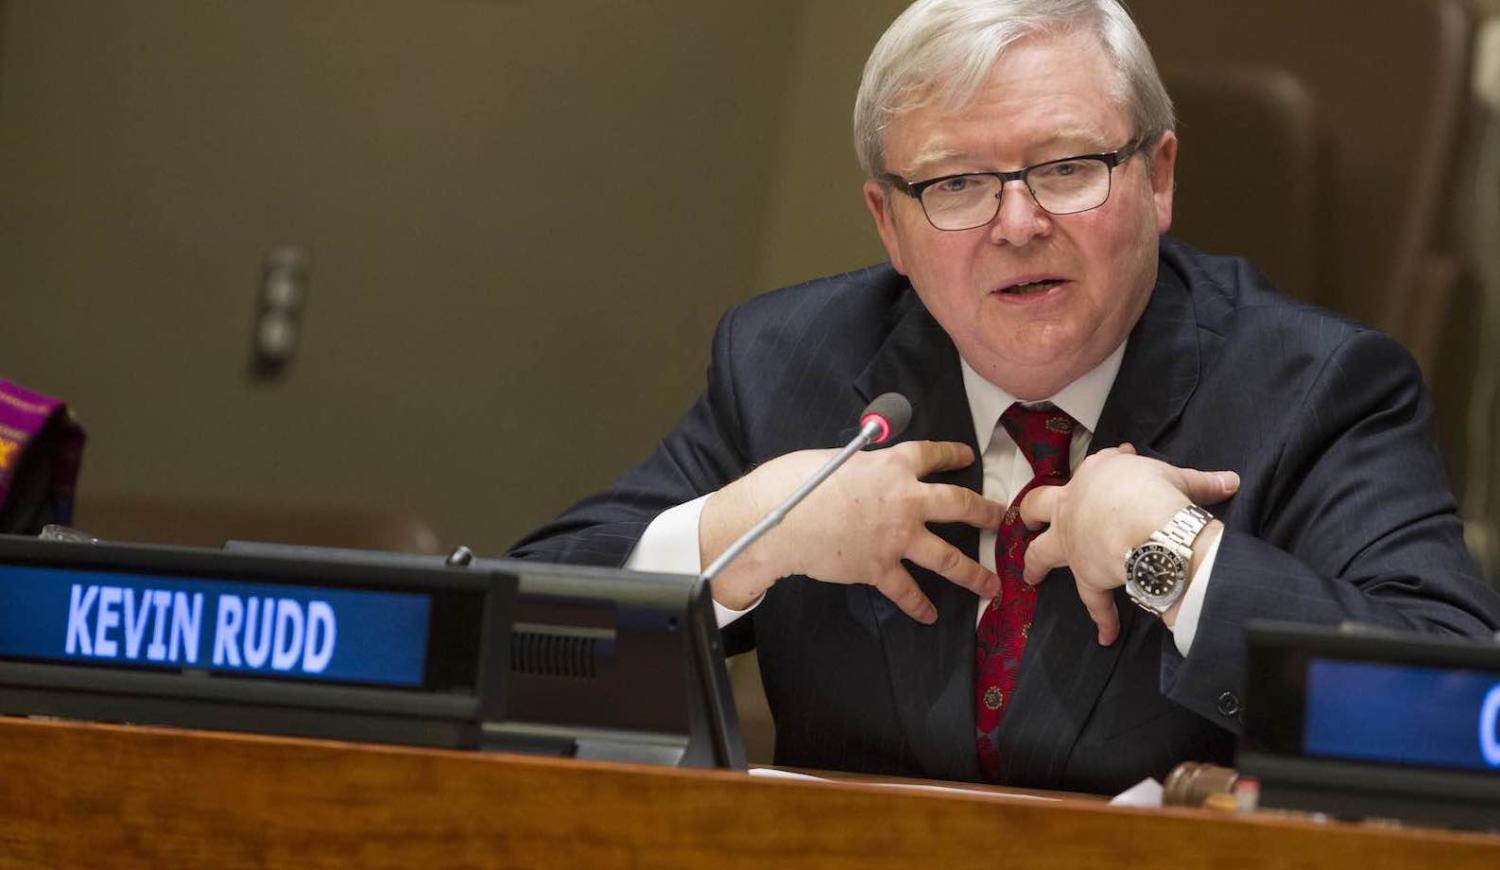 Kevin Rudd argues Australia’s national security is served by the international legal framework against wars of aggression (Photo: Loey Felipe/United Nations)